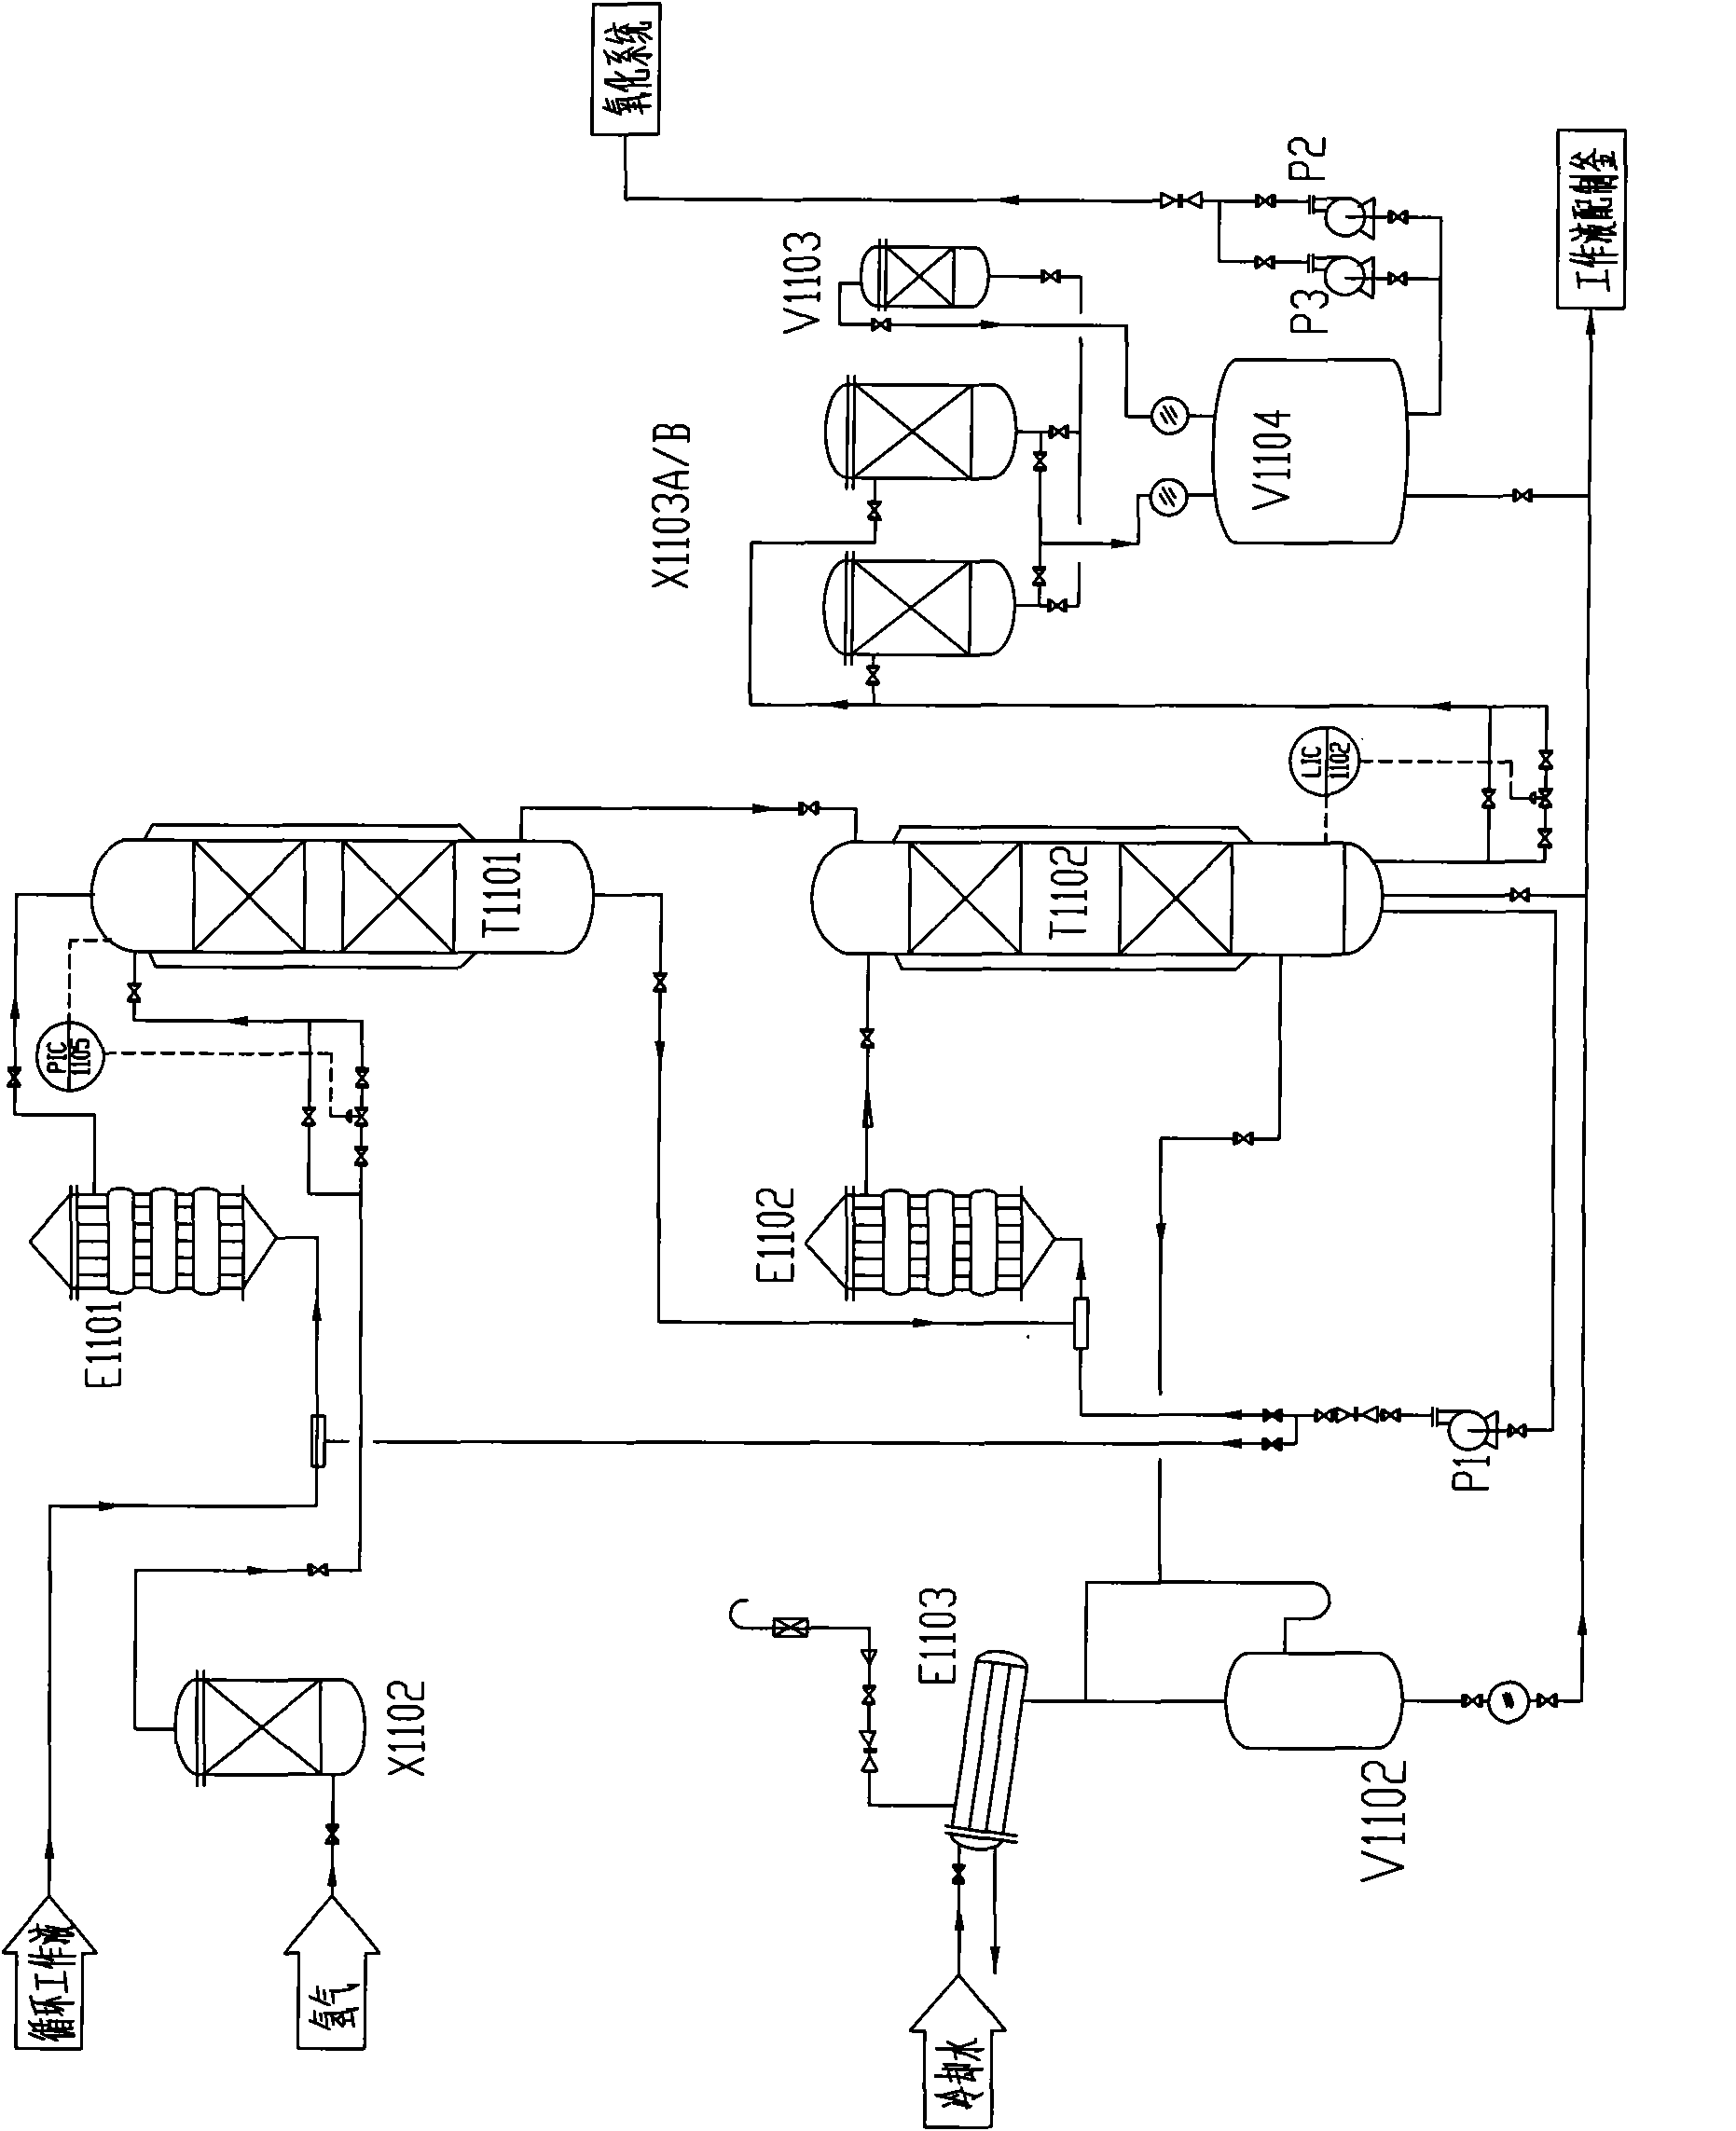 Hydrogenation system for producing hydrogen peroxide